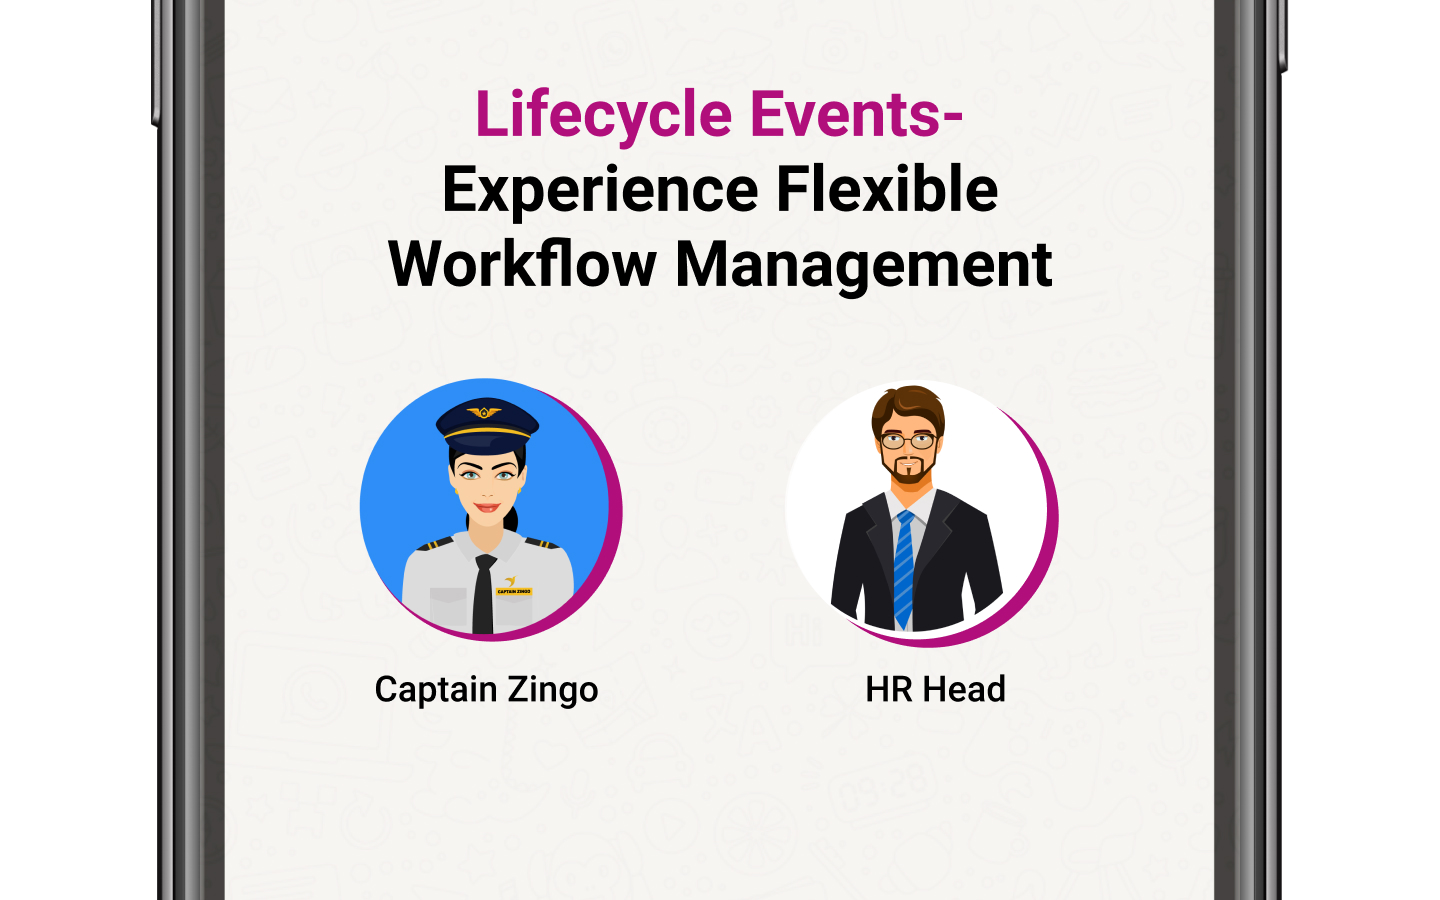 Lifecycle Events- Experience Flexible Workflow Management